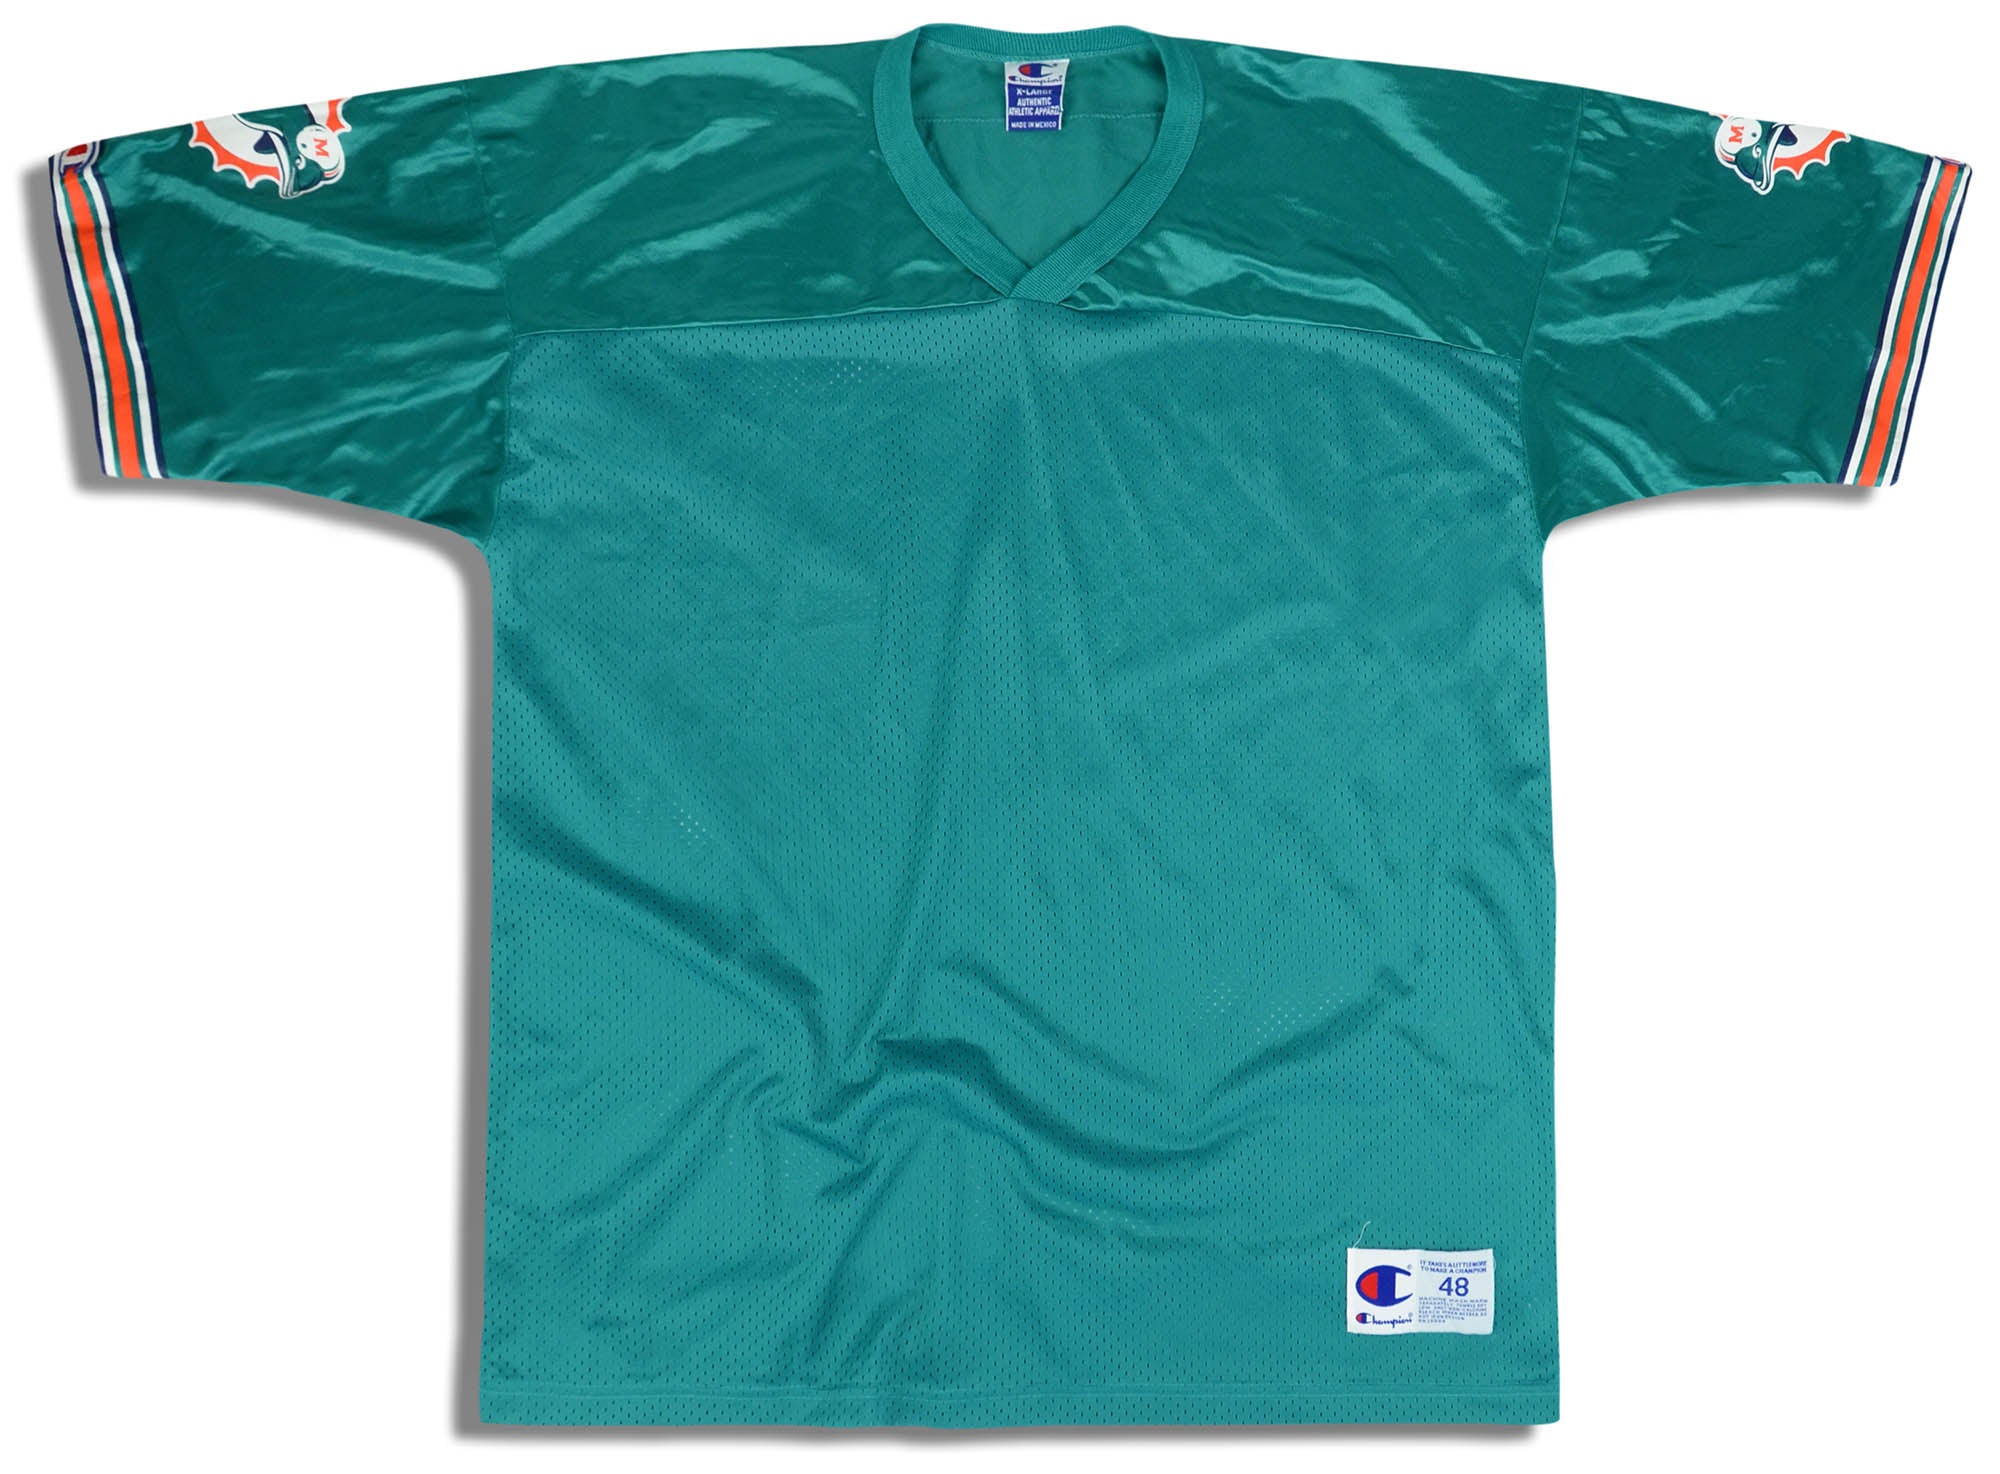 1997-00 MIAMI DOLPHINS CHAMPION JERSEY (HOME) XL